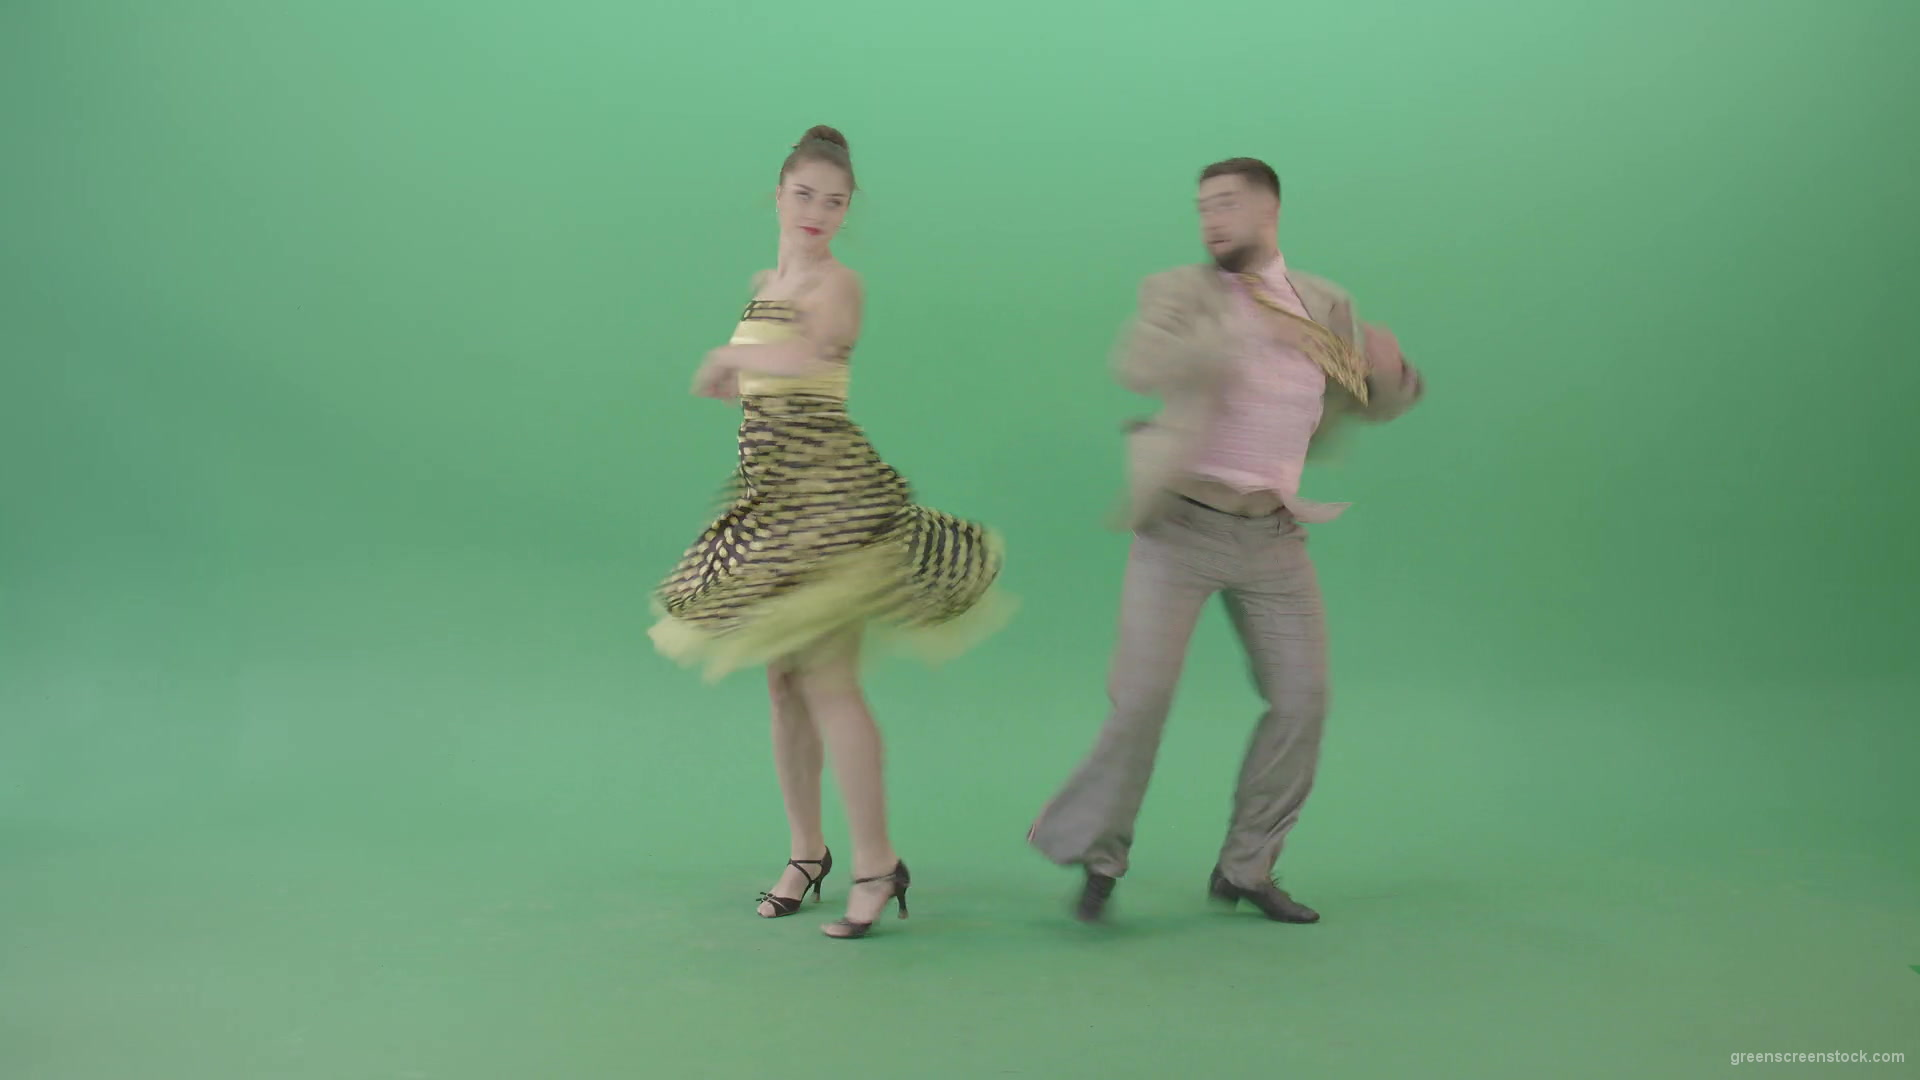 Beautiful-man-and-woman-dancing-Lindy-Hop-Jazz-and-Swing-dance-isolated-on-Green-Screen-4K-Video-Footage-1920_008 Green Screen Stock